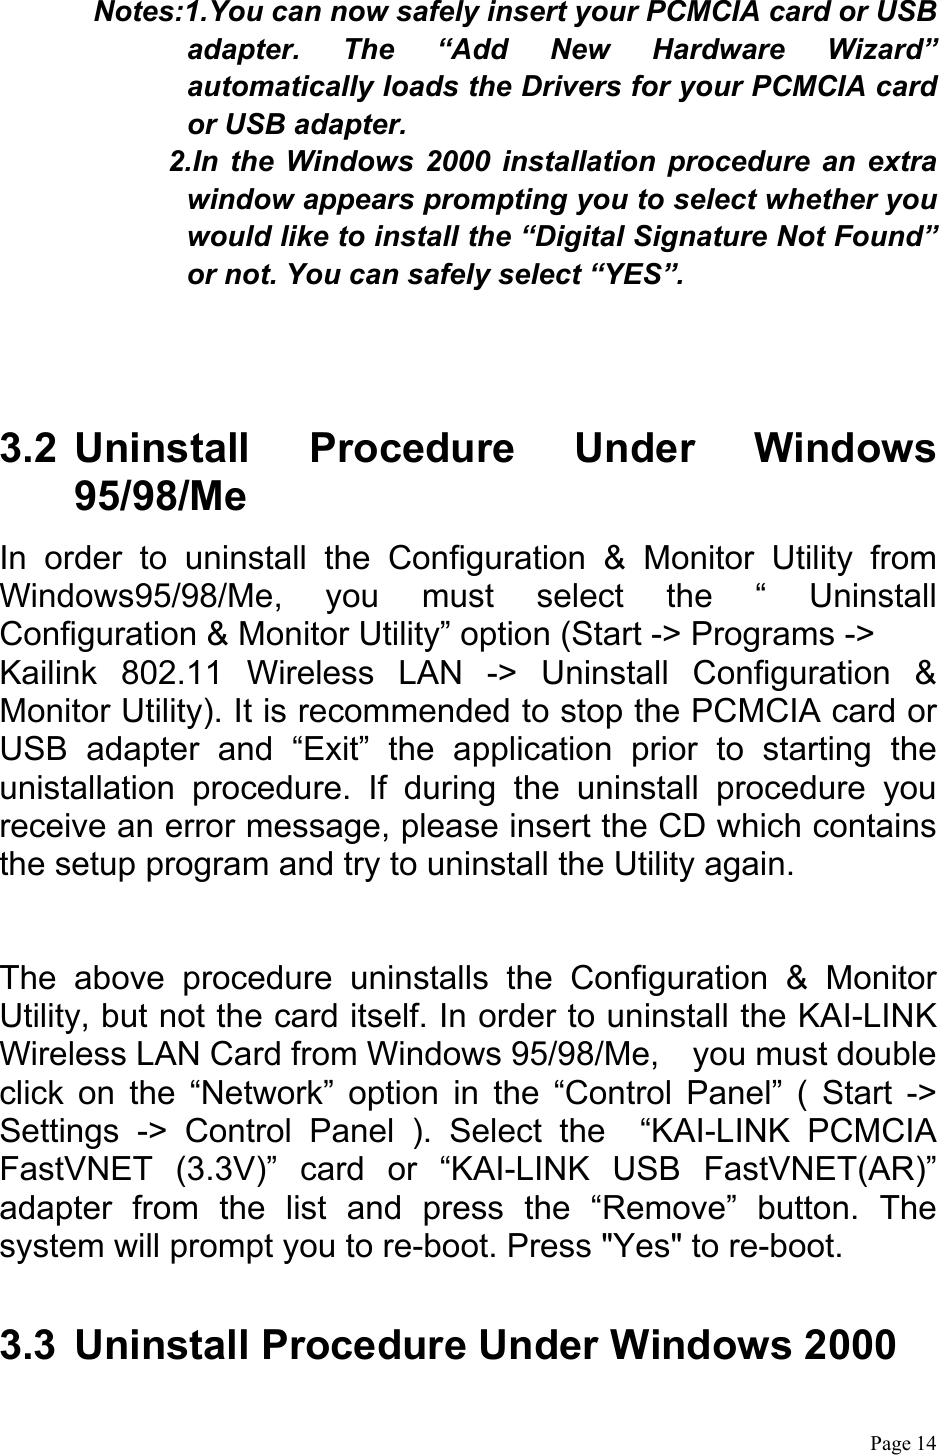  Page 14  Notes:1.You can now safely insert your PCMCIA card or USB adapter. The “Add New Hardware Wizard” automatically loads the Drivers for your PCMCIA card or USB adapter. 2.In the Windows 2000 installation procedure an extra window appears prompting you to select whether you would like to install the “Digital Signature Not Found” or not. You can safely select “YES”.    3.2 Uninstall Procedure Under Windows 95/98/Me In order to uninstall the Configuration &amp; Monitor Utility from Windows95/98/Me, you must select the “ Uninstall Configuration &amp; Monitor Utility” option (Start -&gt; Programs -&gt; Kailink 802.11 Wireless LAN -&gt; Uninstall Configuration &amp; Monitor Utility). It is recommended to stop the PCMCIA card or USB adapter and “Exit” the application prior to starting the unistallation procedure. If during the uninstall procedure you receive an error message, please insert the CD which contains the setup program and try to uninstall the Utility again.  The above procedure uninstalls the Configuration &amp; Monitor Utility, but not the card itself. In order to uninstall the KAI-LINK Wireless LAN Card from Windows 95/98/Me,    you must double click on the “Network” option in the “Control Panel” ( Start -&gt; Settings -&gt; Control Panel ). Select the  “KAI-LINK PCMCIA FastVNET (3.3V)” card or “KAI-LINK USB FastVNET(AR)” adapter from the list and press the “Remove” button. The system will prompt you to re-boot. Press &quot;Yes&quot; to re-boot.  3.3  Uninstall Procedure Under Windows 2000  